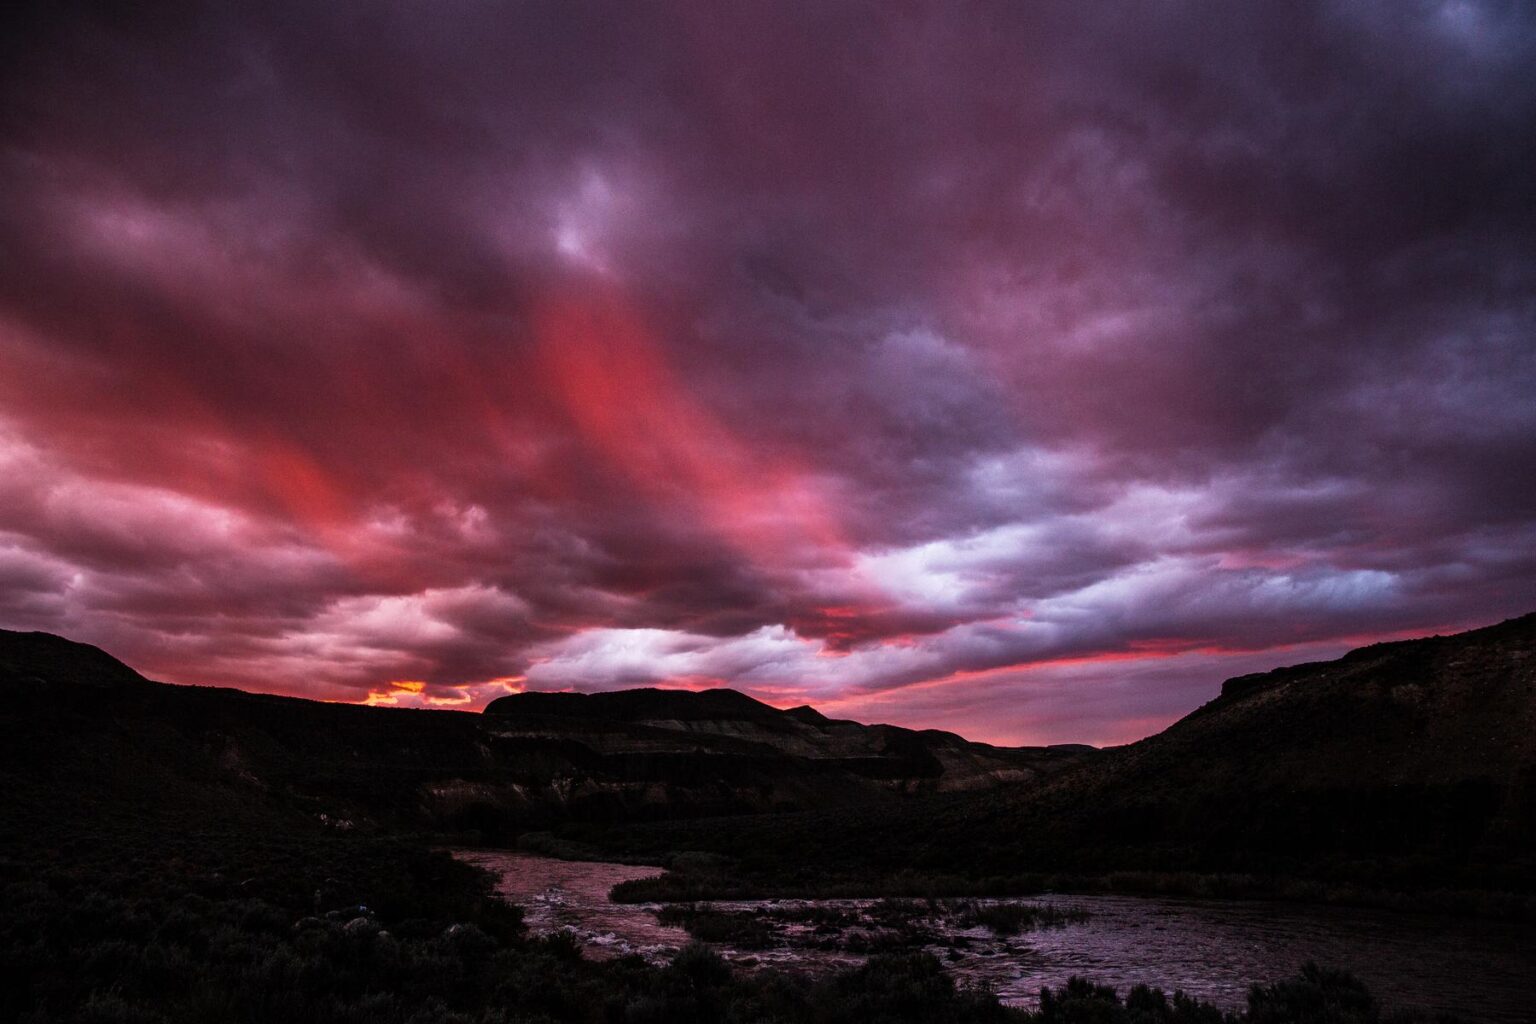 Sunset over the Owyhee River in Oregon